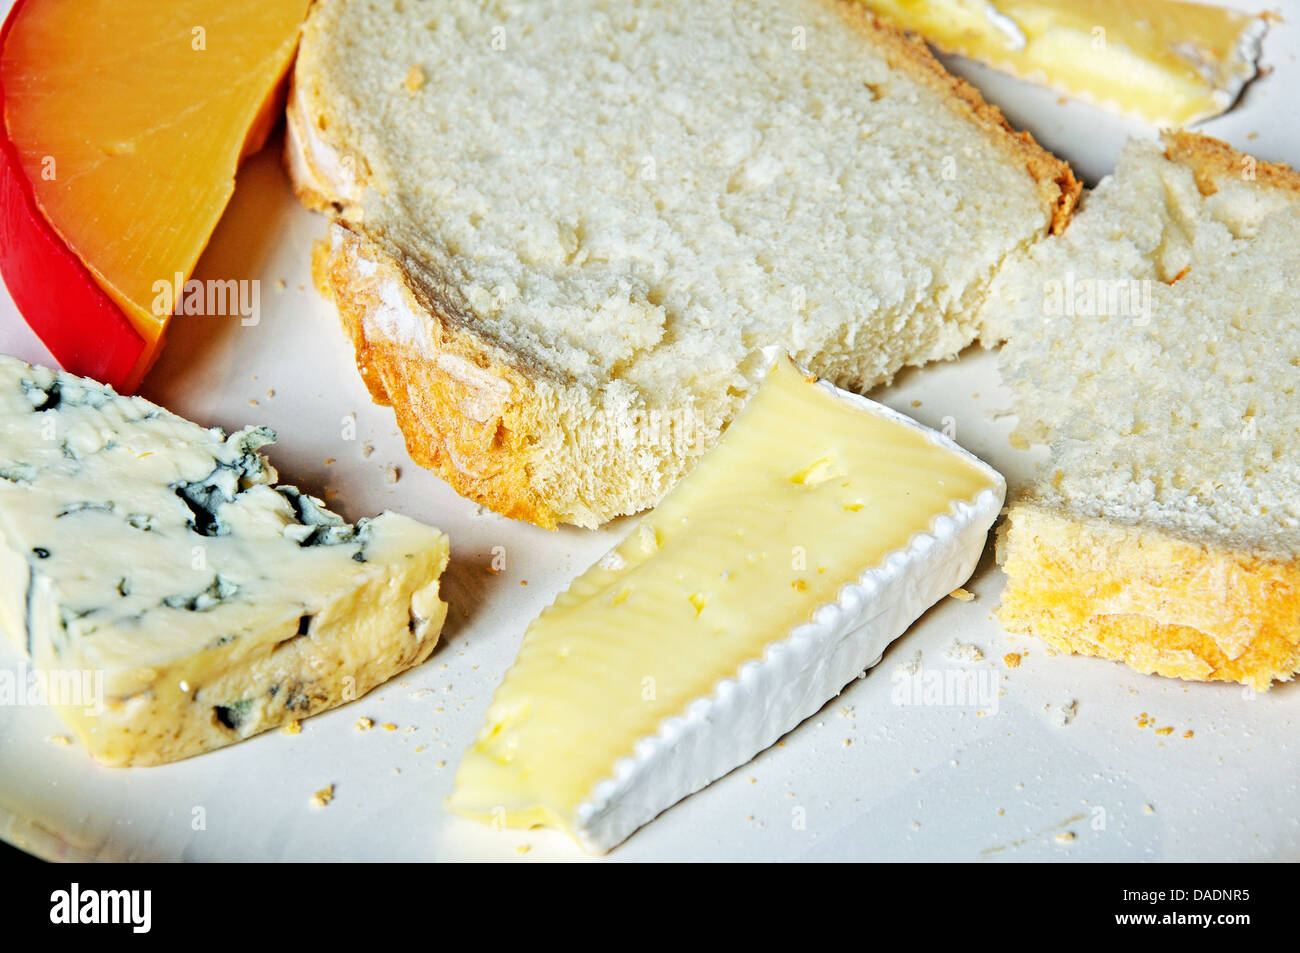 French Brie cheese with French blue cheese and Dutch Edam cheese and slices of white bread. Stock Photo